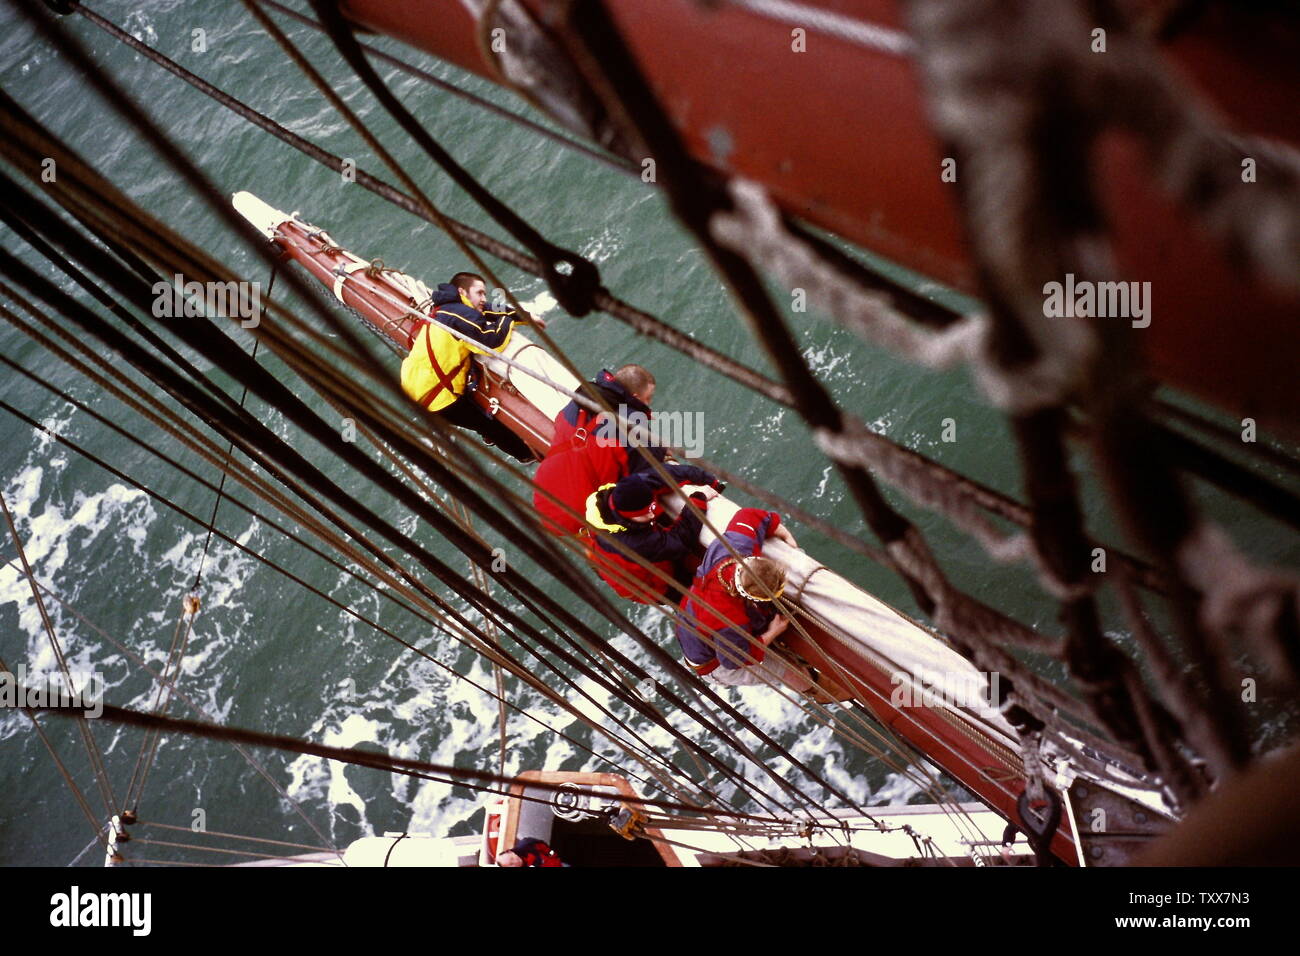 AJAXNETPHOTO. PORTSMOUTH, ENGLAND. - TALL SHIP SAILING - CREW OF THE TALL SHIP PRINCE WILLIAM FURLING SAIL BEFORE ENTERING HARBOUR. PHOTO:JONATHAN EASTLAND/AJAX REF:131208 172 Stock Photo